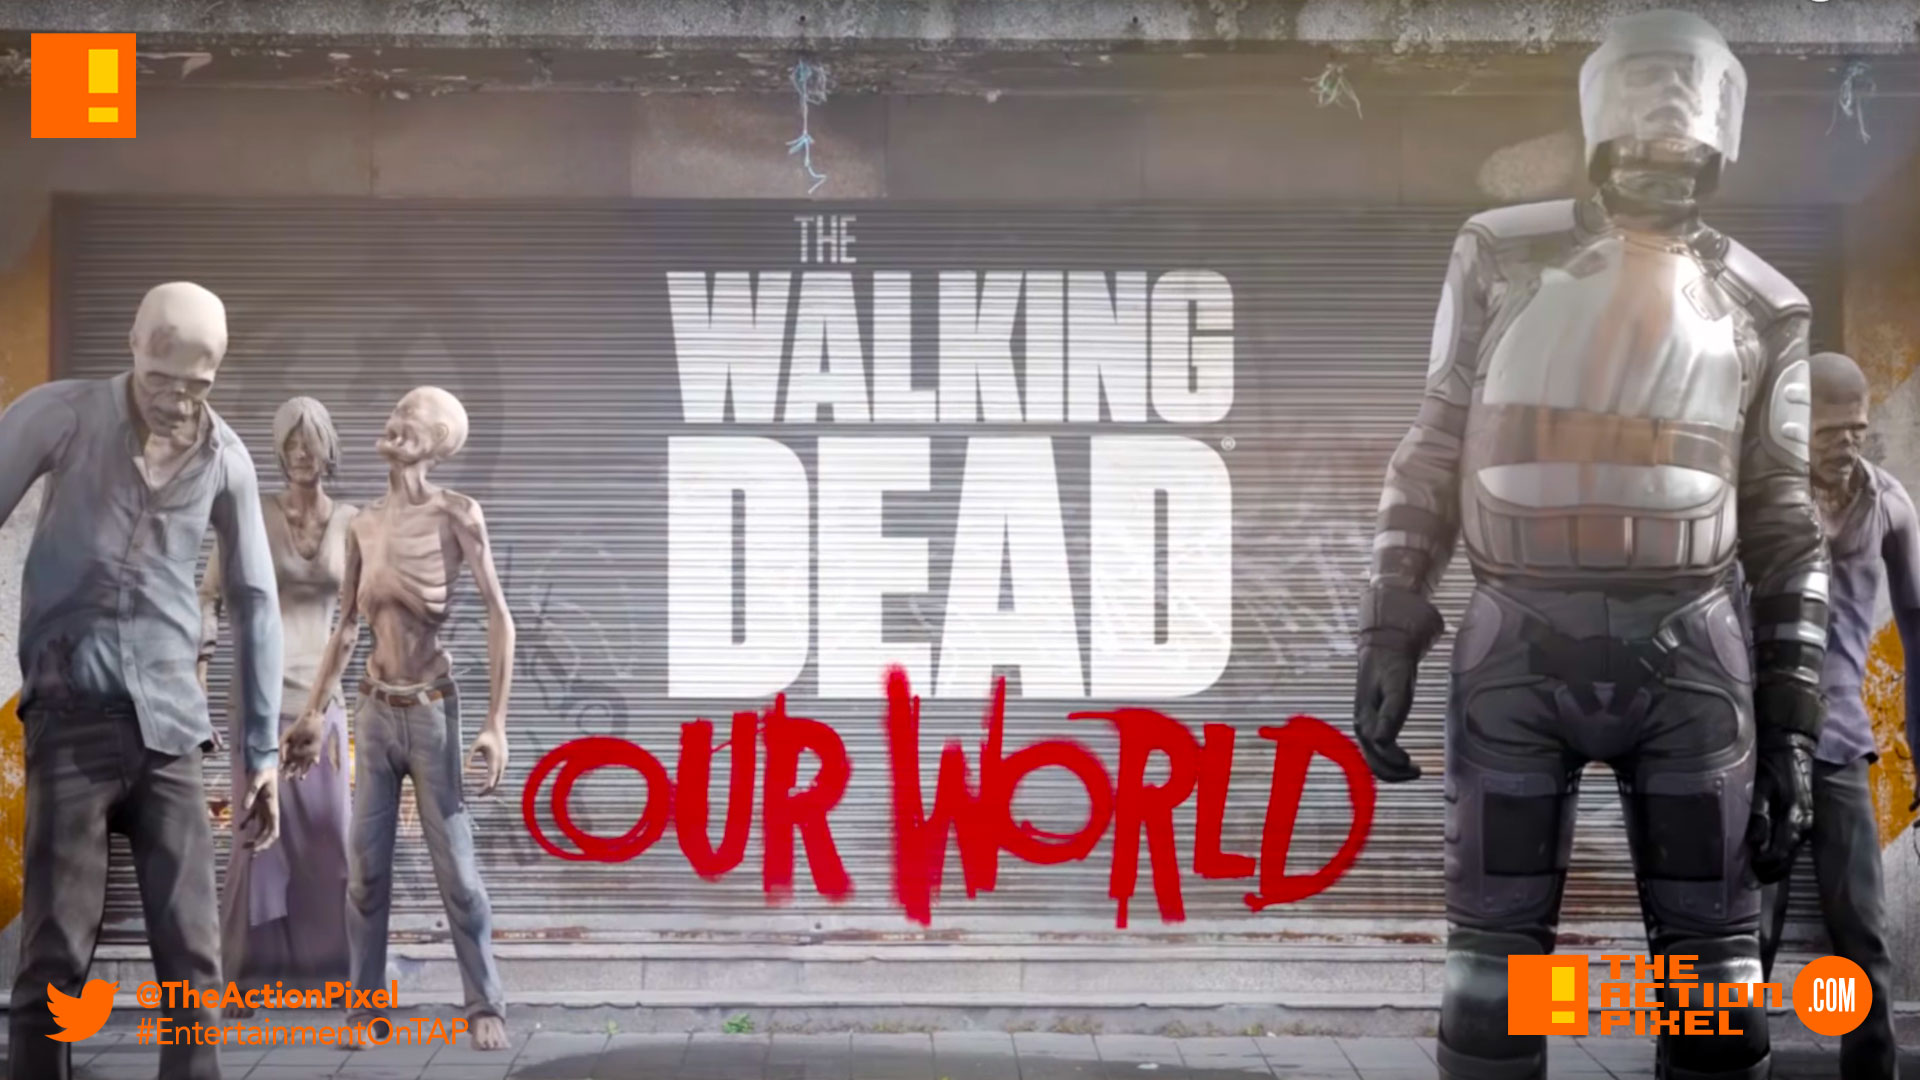 twd, our world, the walking dead, amc, the walking dead our world, the action pixel, entertainment on tap, next games, skybound,the walking dead, the walking dead: our world, twd our world, twd: our world, the action pixel, entertainment on tap,